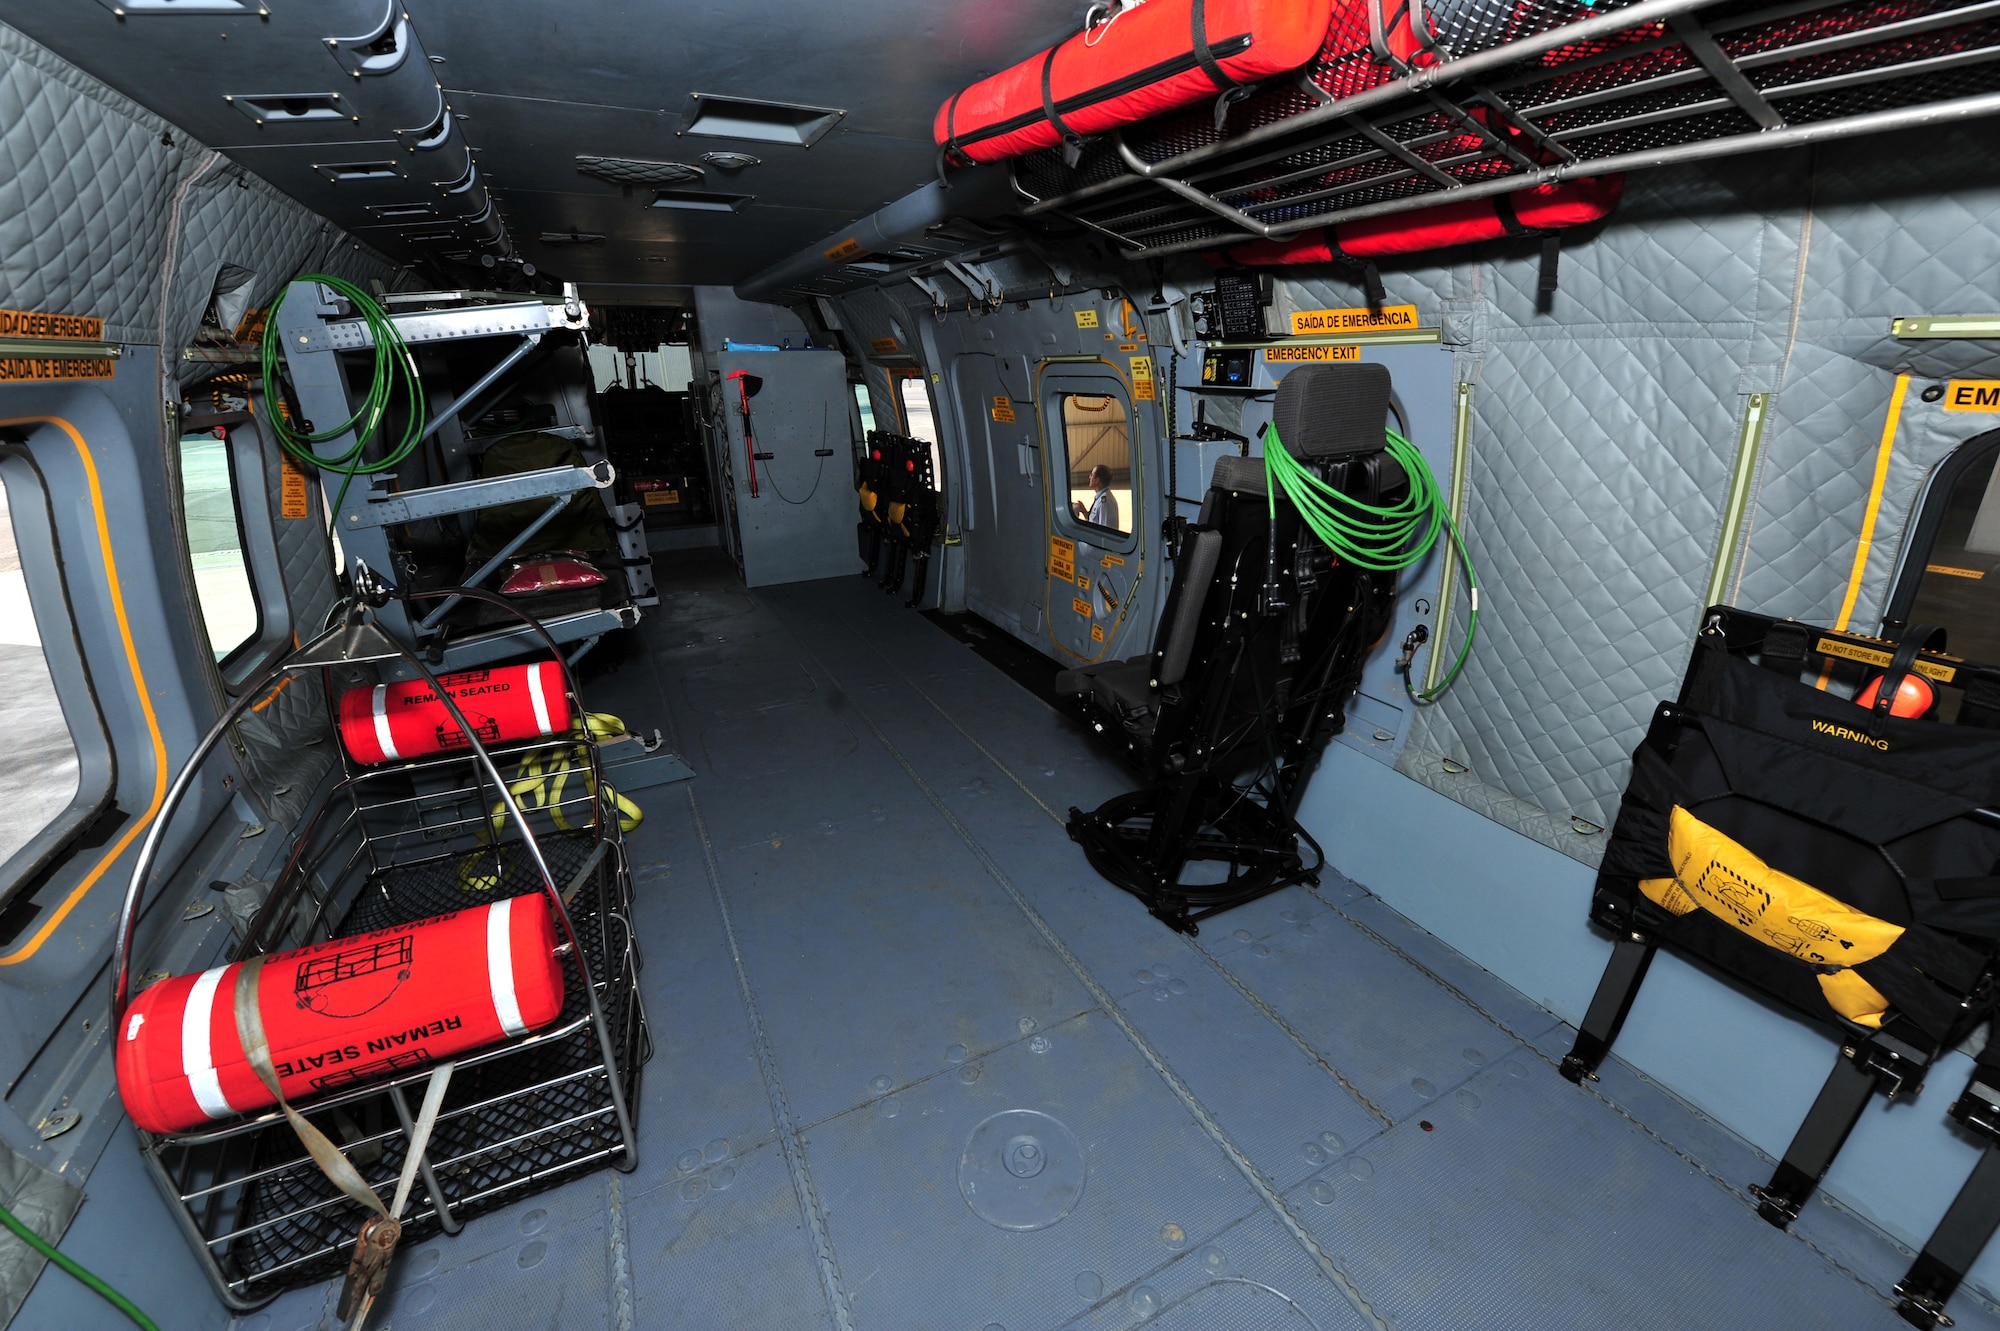 The inside of an EH-101 Merlin helicopter, ready for emergency and medical responses, at Portuguese Air Base 4, commonly known as Lajes Field.  The Portuguese Air Force search and rescue arsenal consists of two EH-101 Merlin helicopters which remain on 24-hour alert at the base.  SAR crews in the Merlin typically consist of a pilot, co-pilot, systems operator, rescue swimmer and nurse.  (U.S. Air Force photo by Tech. Sgt. Chenzira Mallory/released)